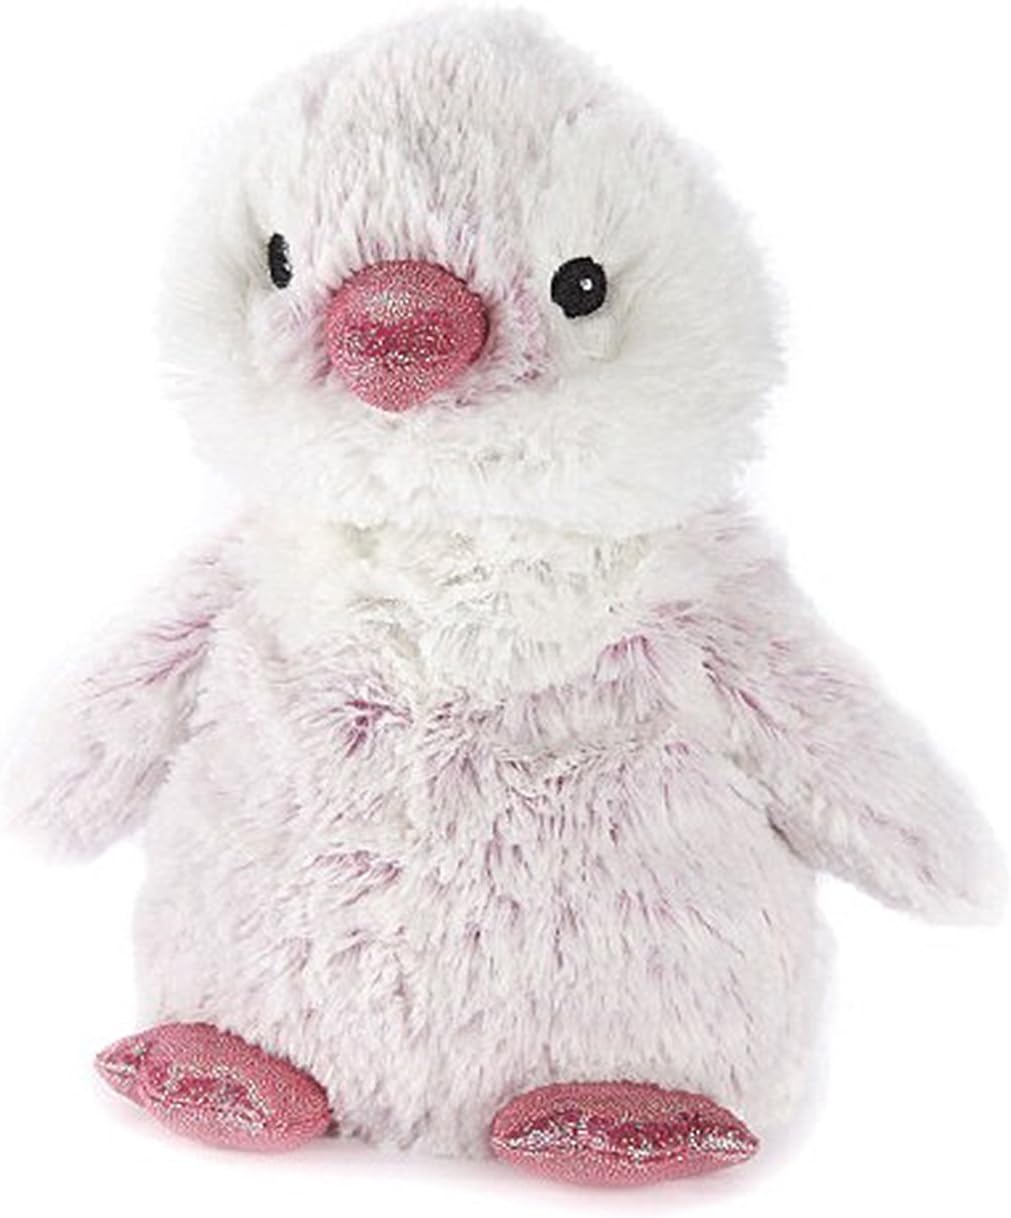 Warmies® Plush Heat Up Microwavable Soft Cuddly Toy - Marshmallow Penguin